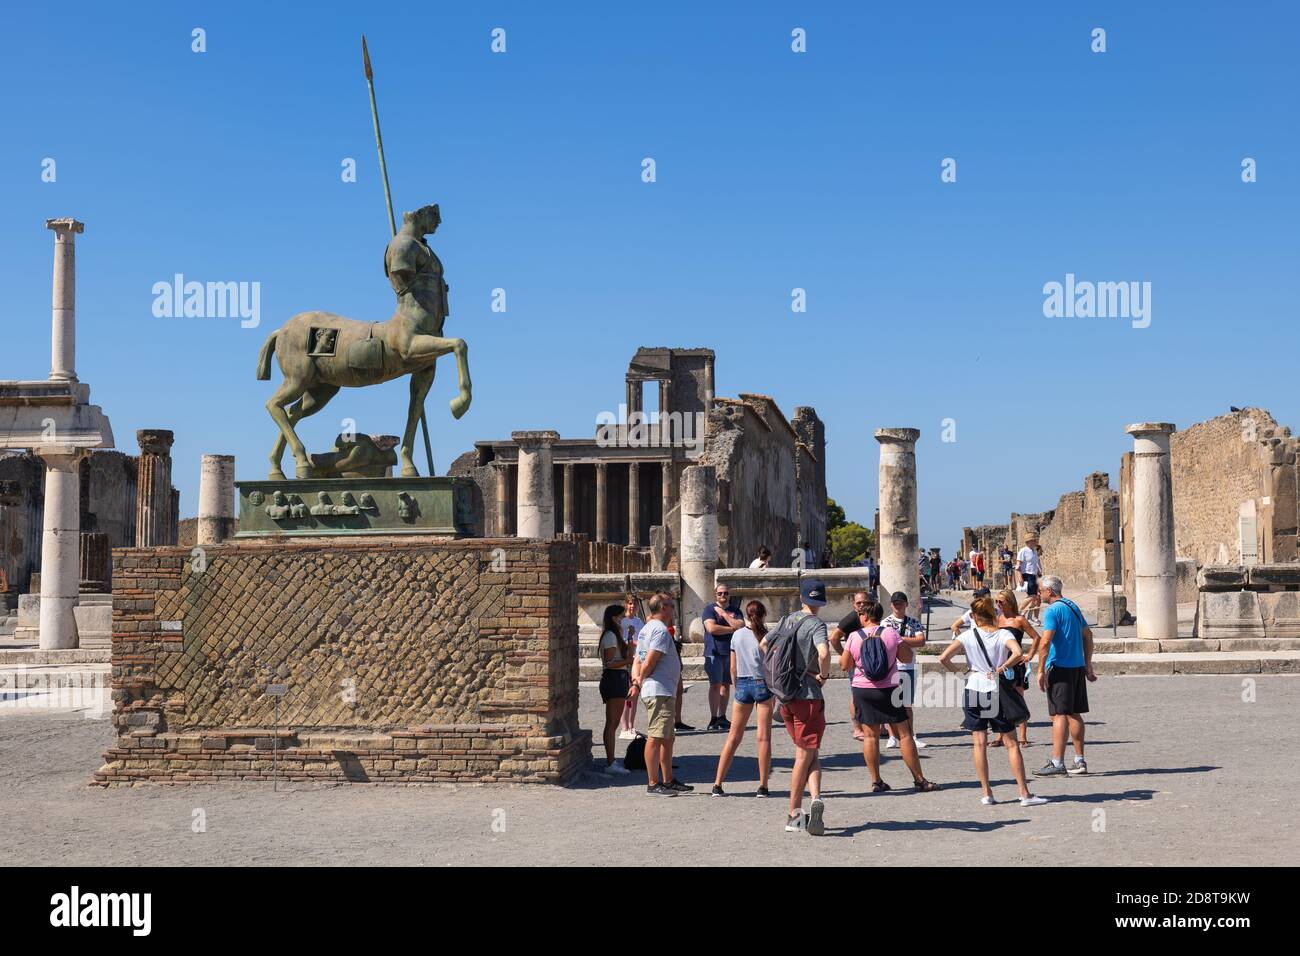 Pompeii Forum with statue of Centaur, Campania, Italy, group of people, tourists on a sightseeing tour Stock Photo